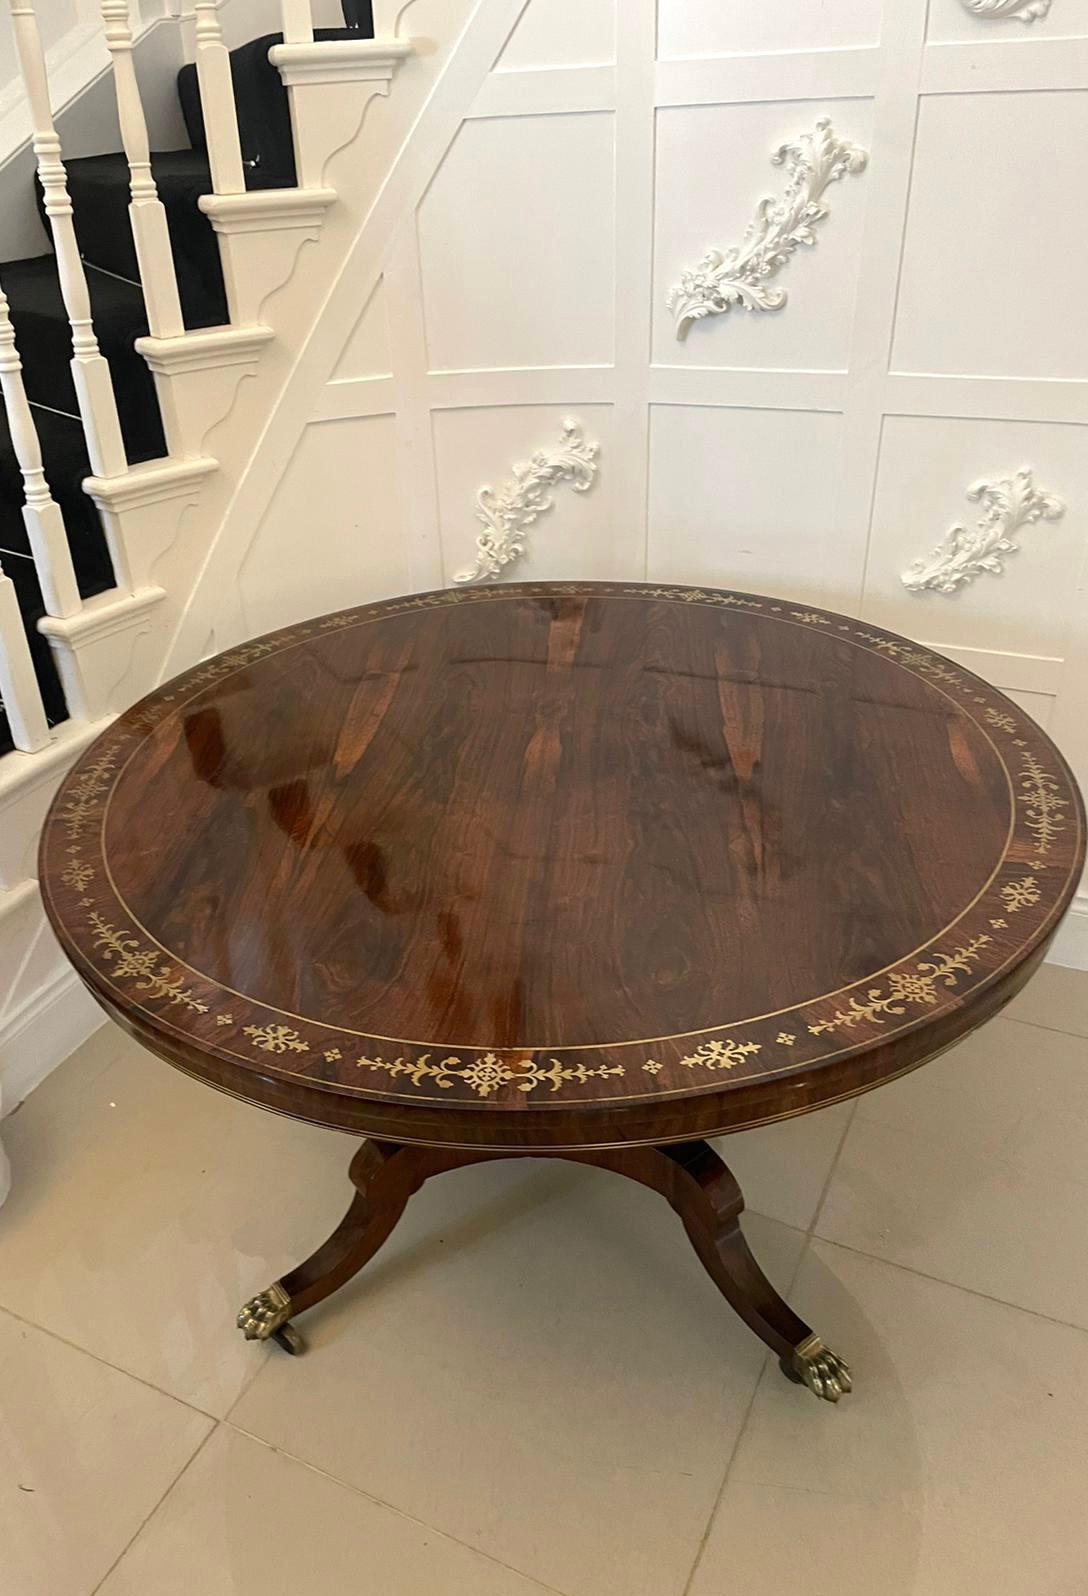 Outstanding quality antique regency brass inlaid rosewood centre/dining table having an outstanding quality circular rosewood brass inlaid tilt top supported by an elegant turned pedestal column raised on a shaped platform base with shaped sabre